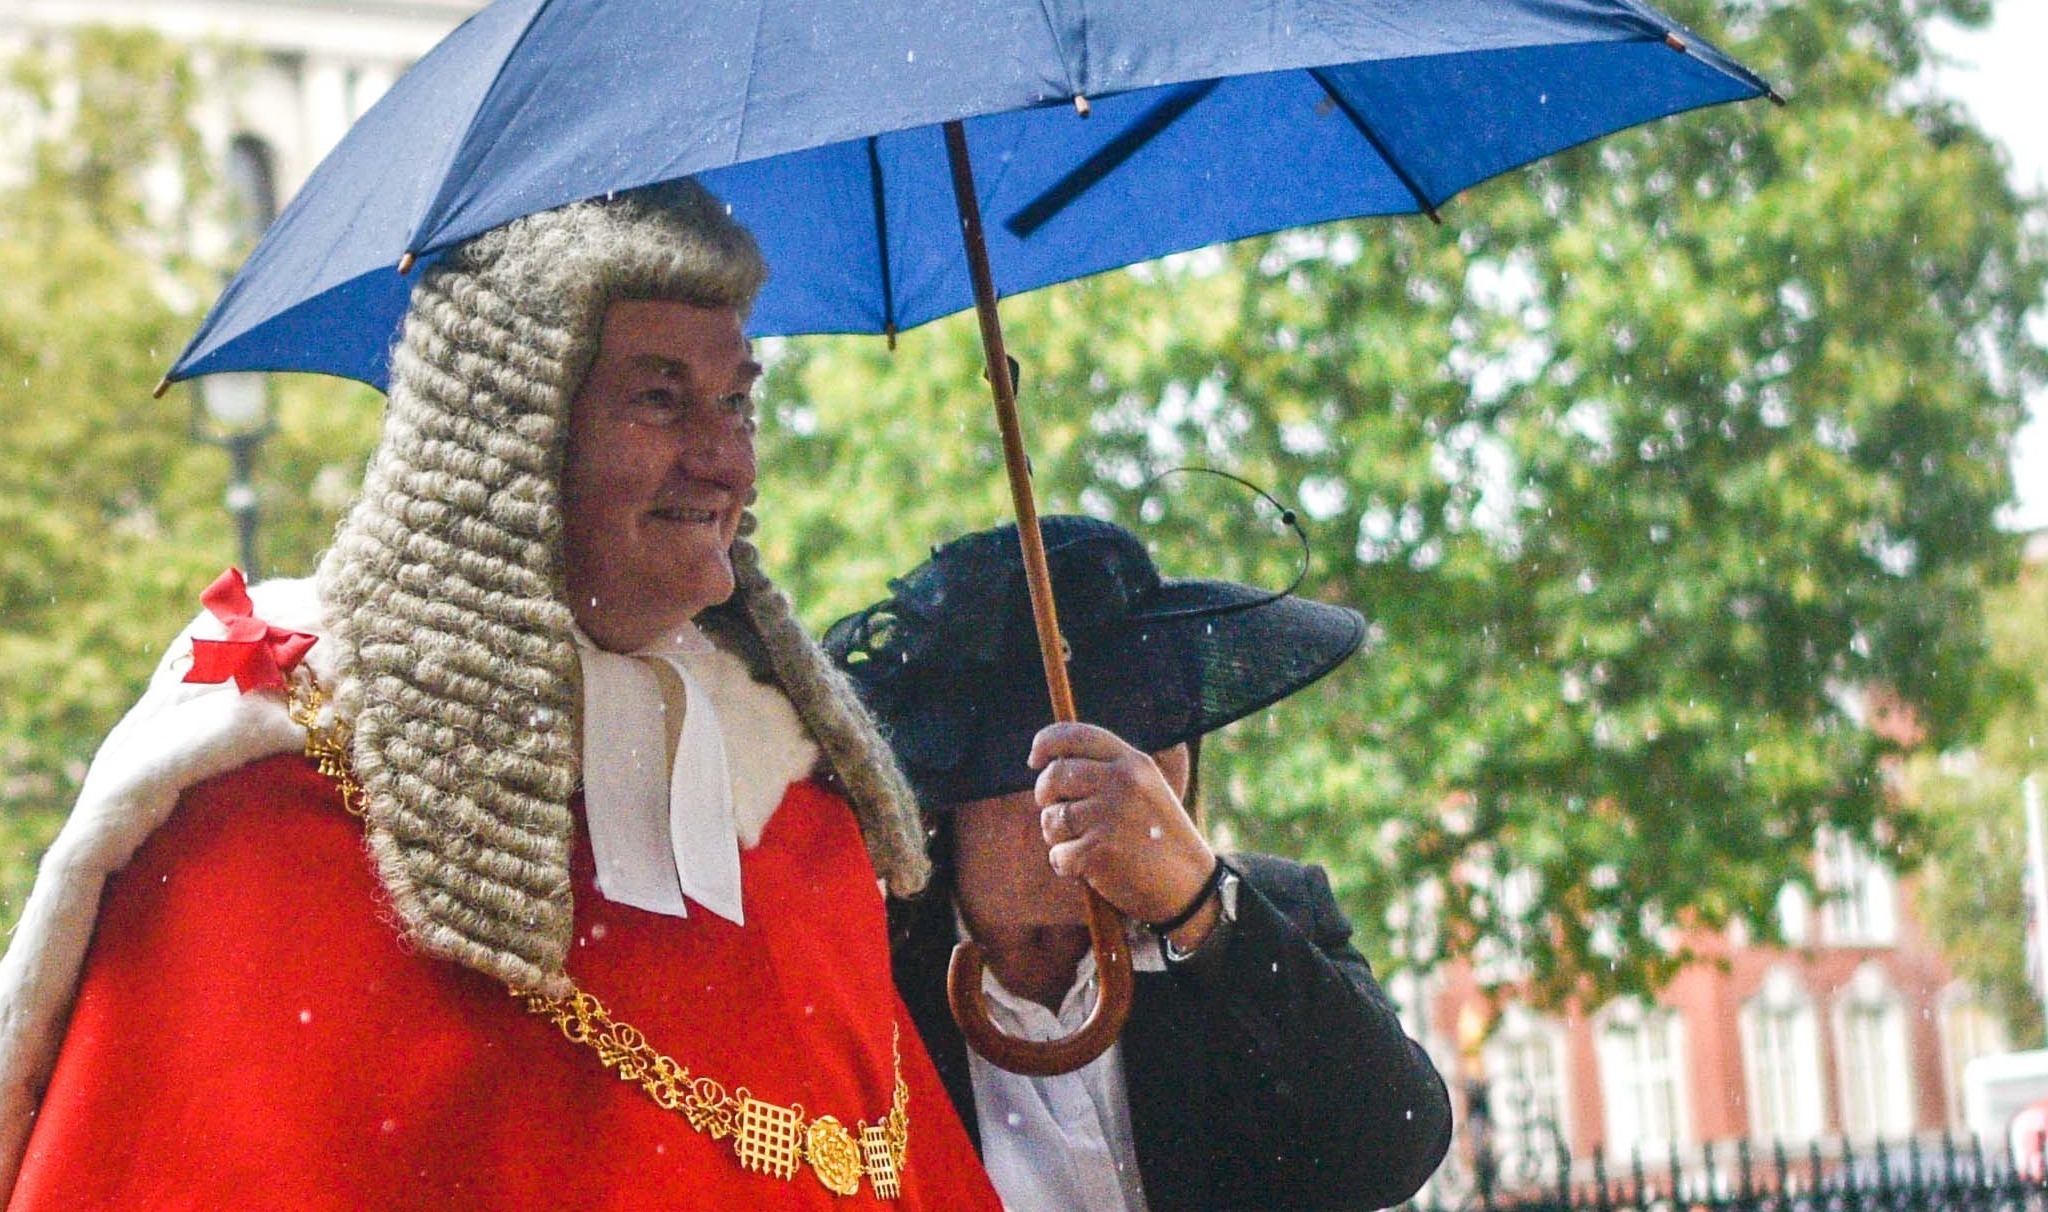 Lord Chief Justice Ian Burnett. (Photo: Peter Summers / Getty)